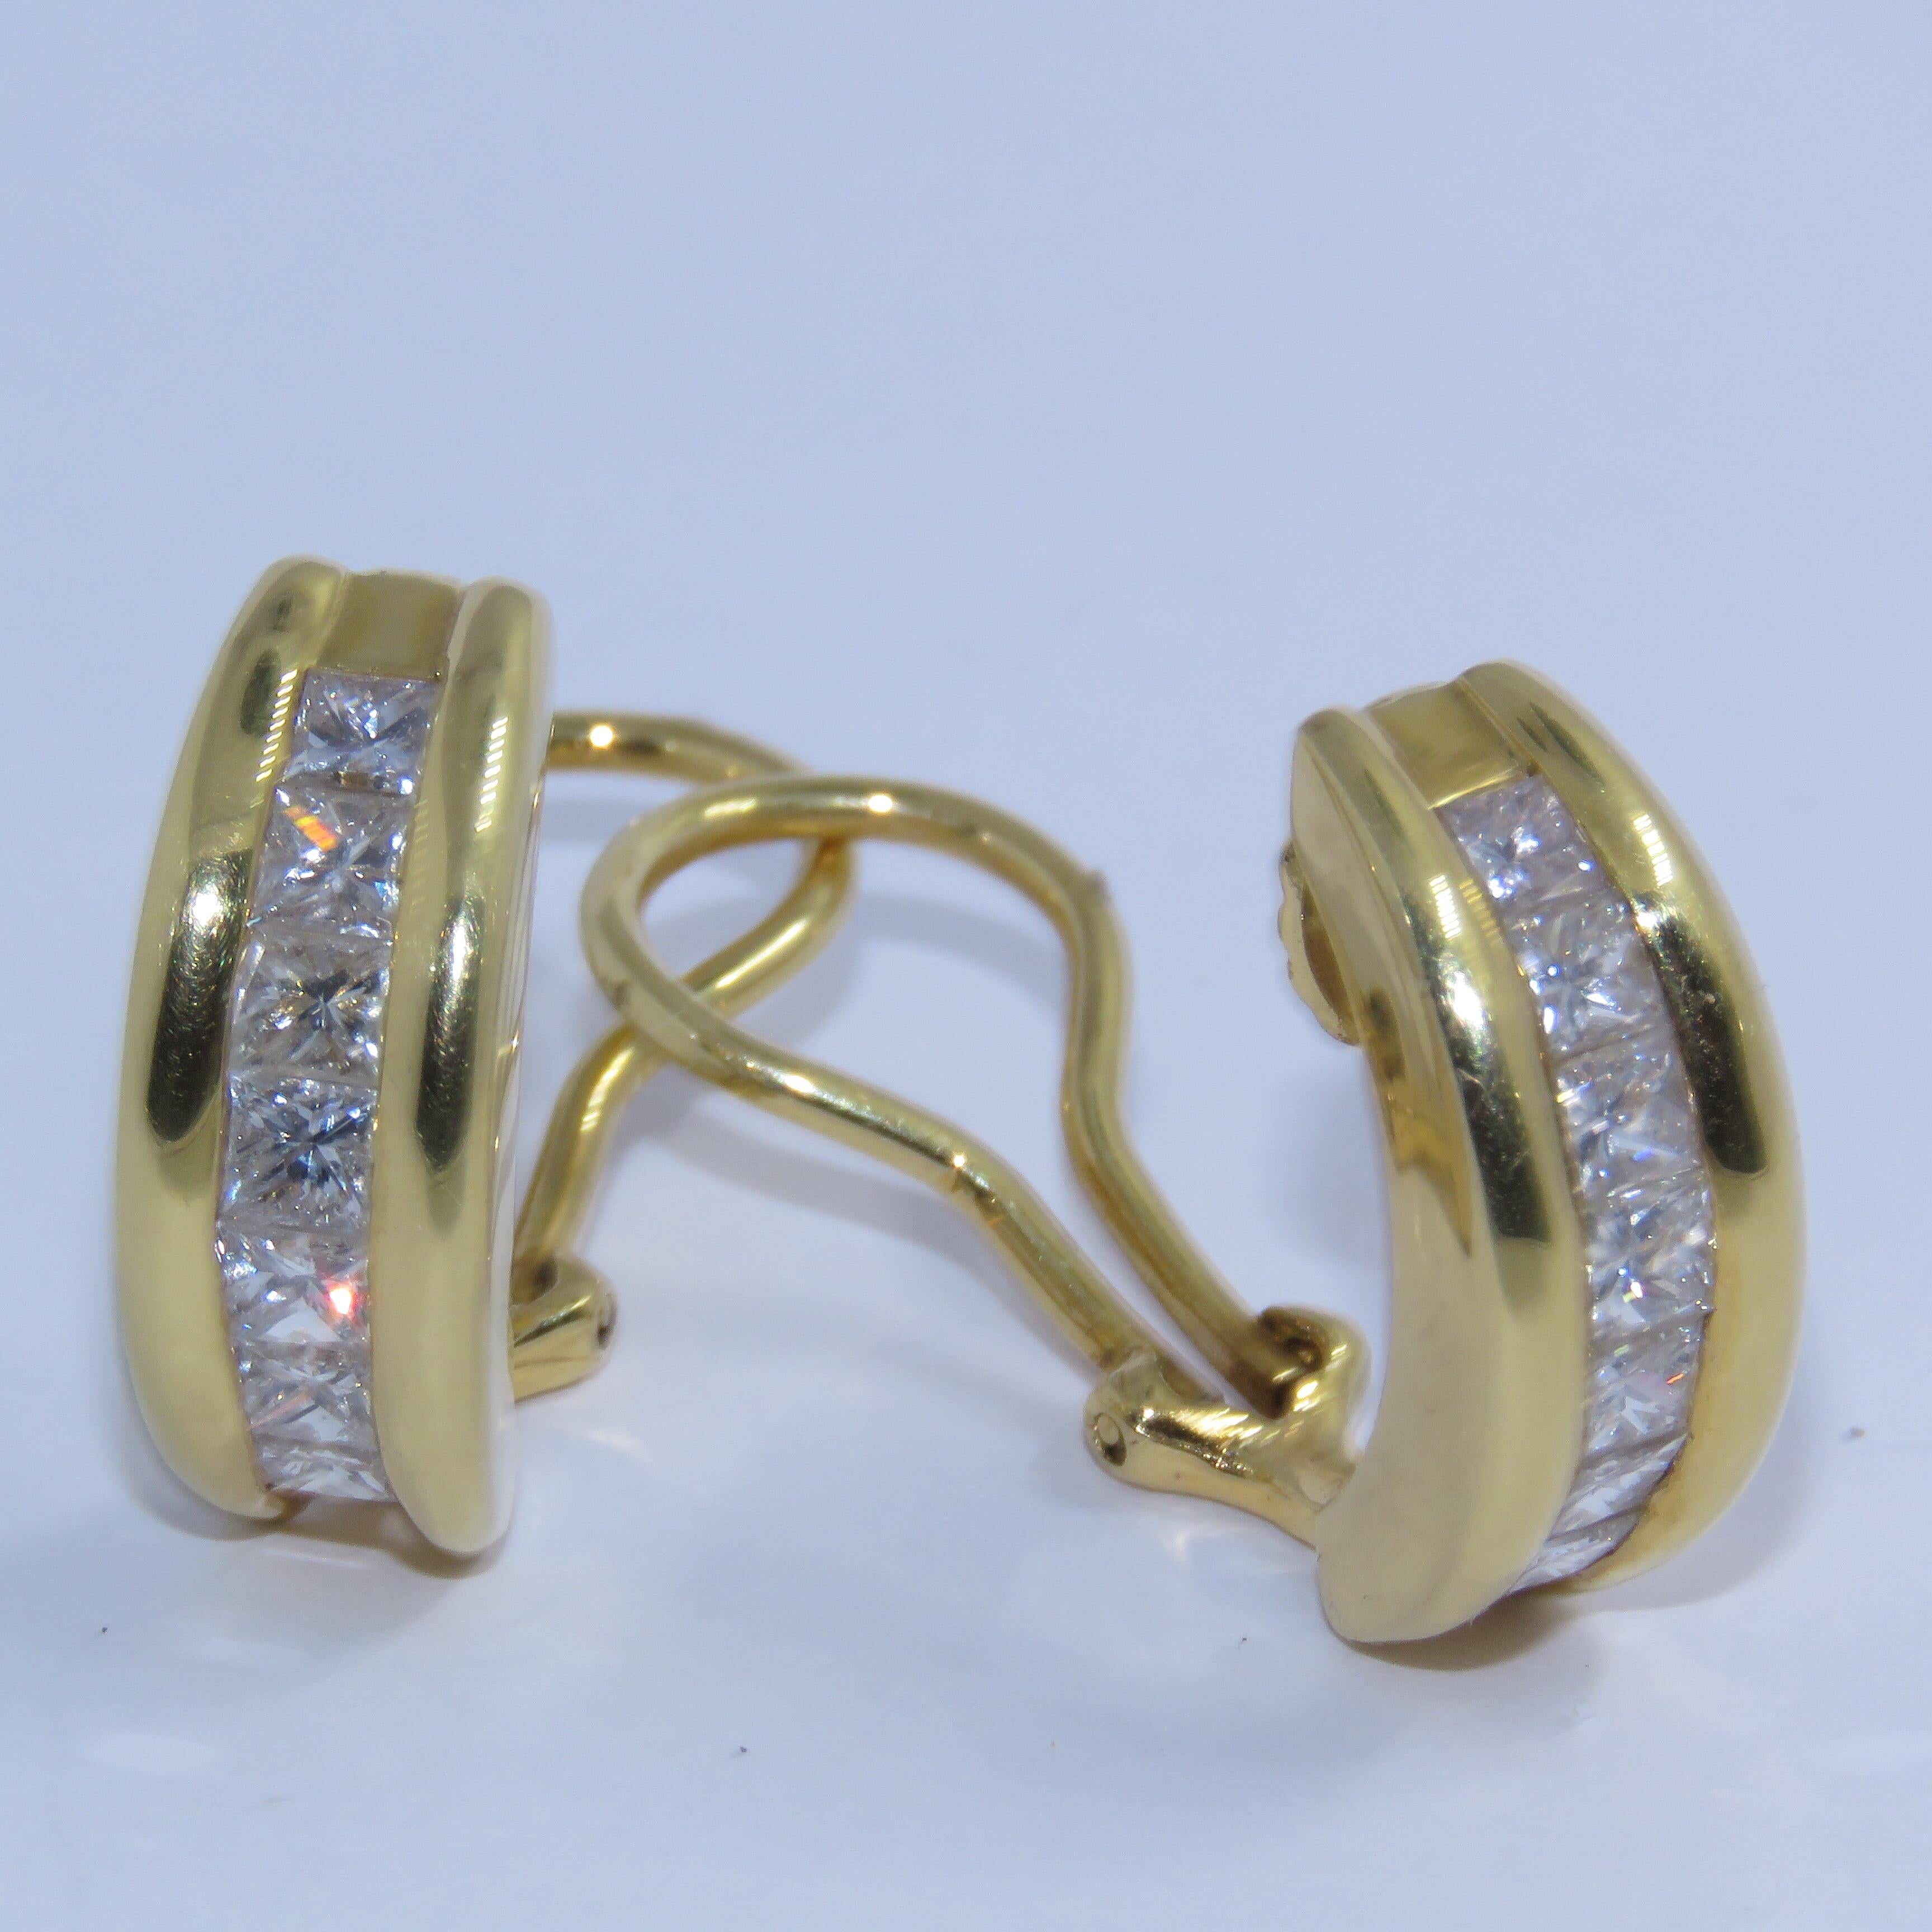 Princess Cut Diamond Earrings 
Diamonds 2.01 Ct
Channel Set 
18 Kt Yellow Gold 
French Back with collapsible stems 